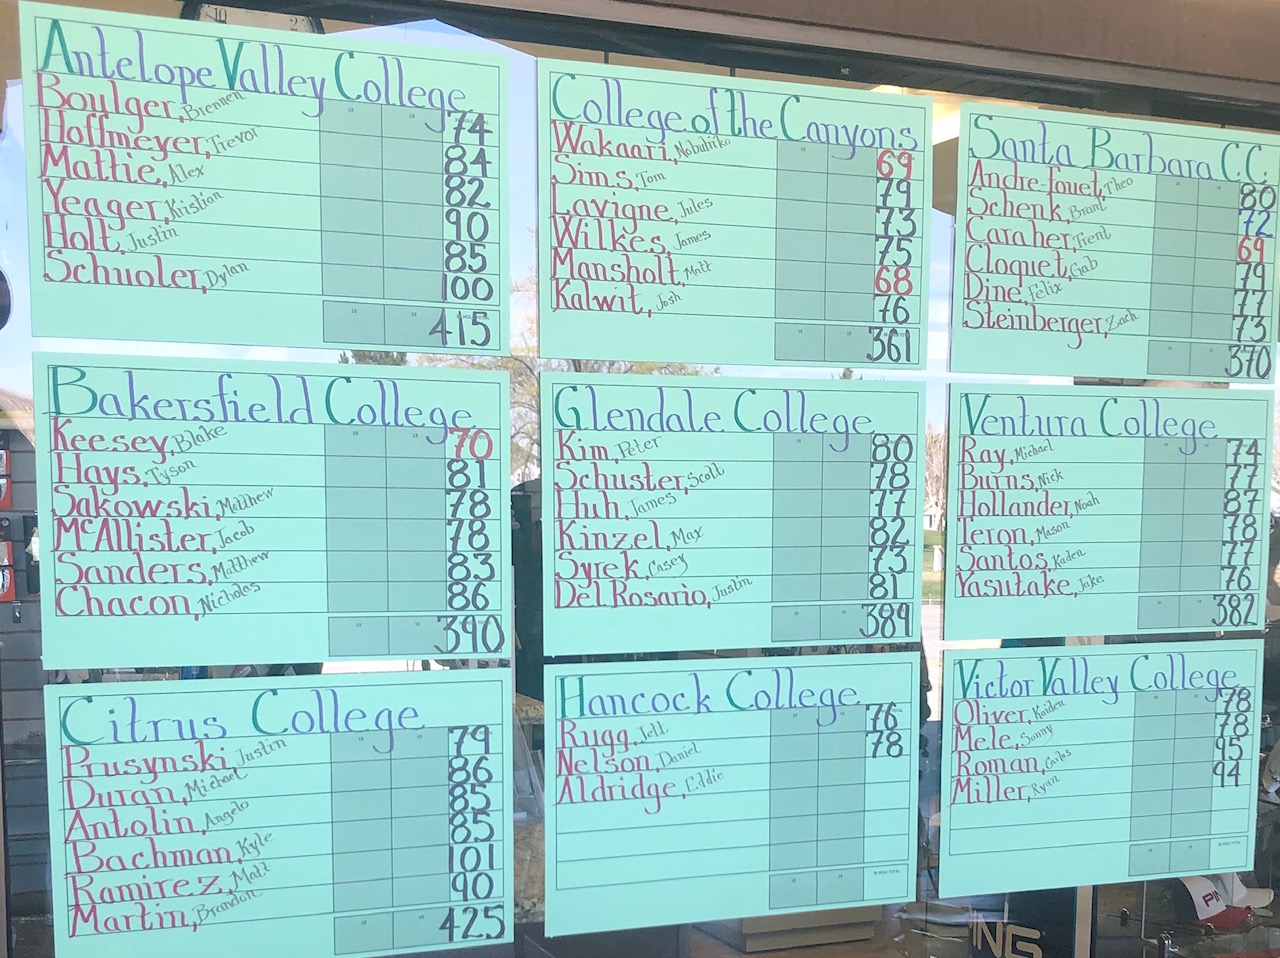 Western State Conference men's golf scores for the event on March 25, 2019.